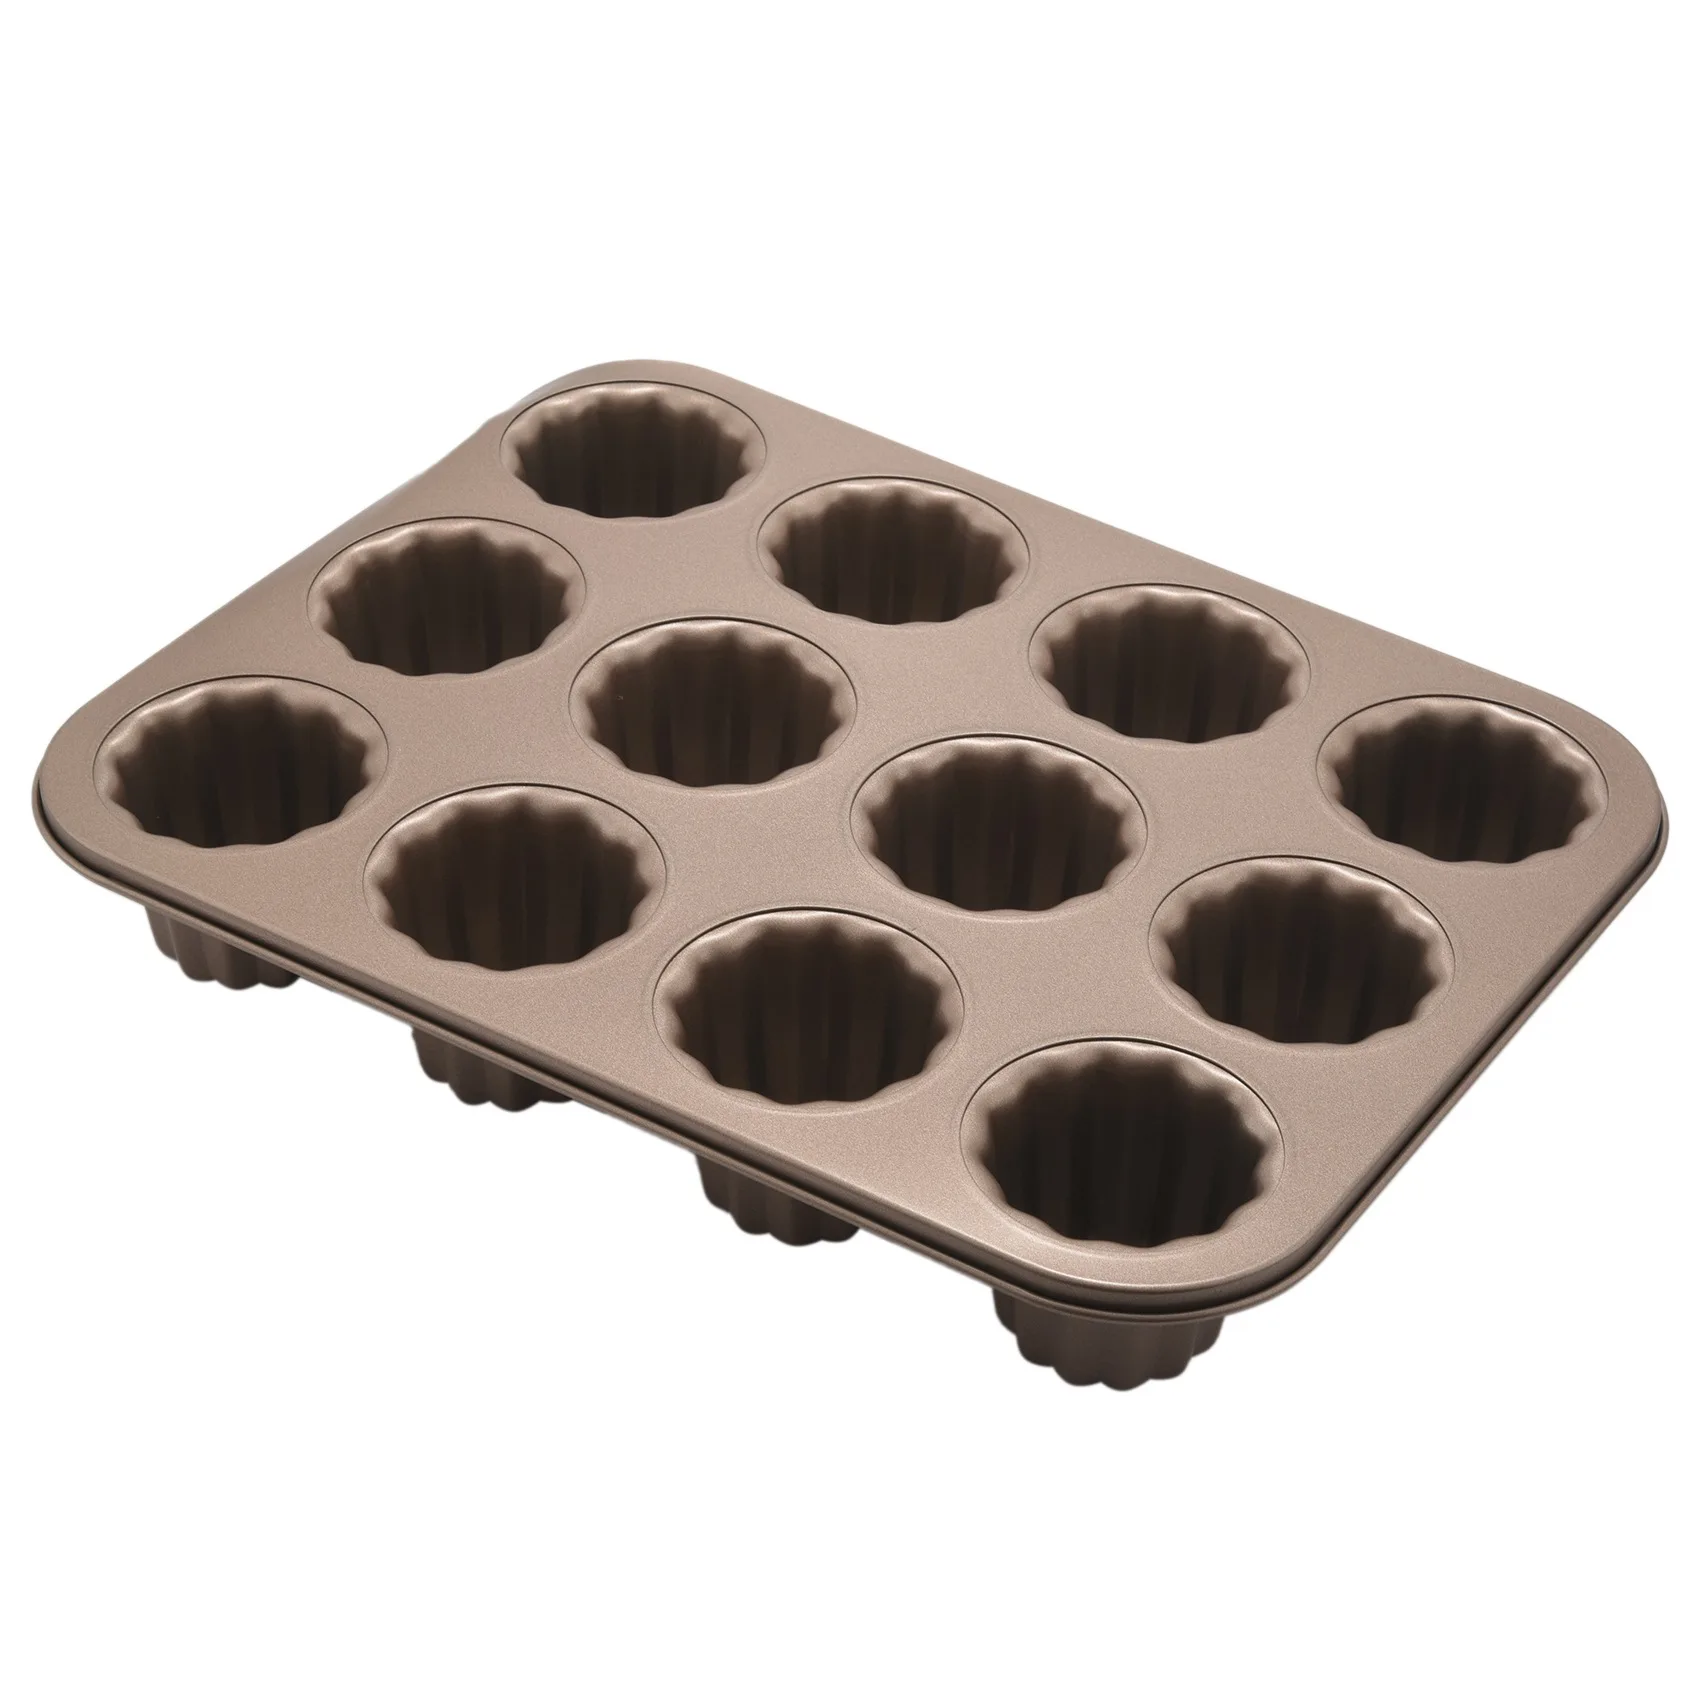 

Canele Mold Cake Pan, 12-Cavity Non-Stick Cannele Muffin Bakeware Cupcake Pan for Oven Baking(Champagne Gold)